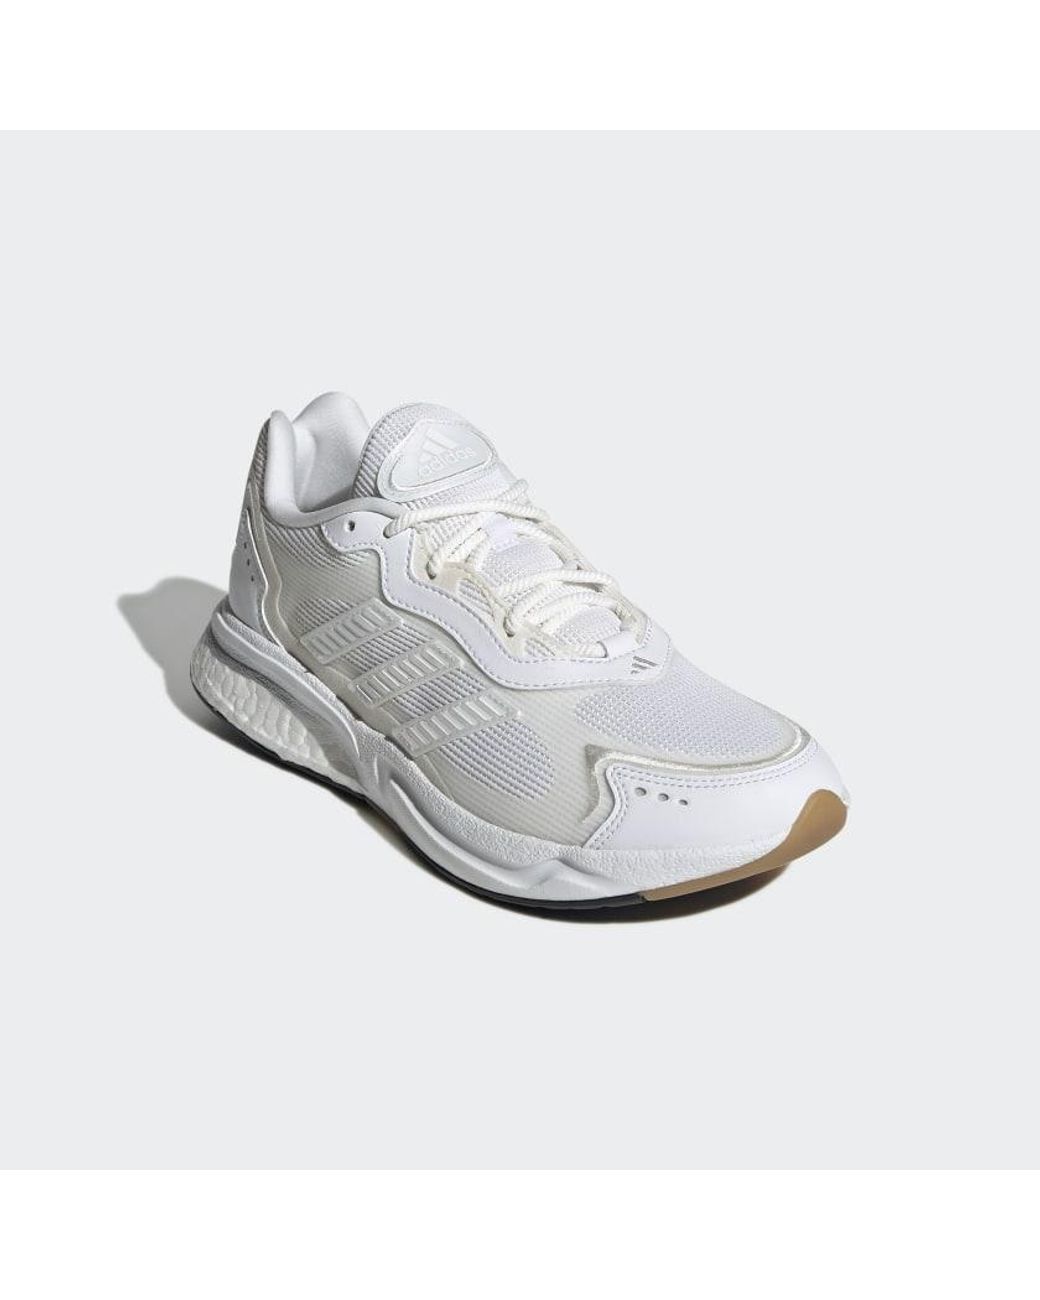 adidas Sn 1997 Shoes in White | Lyst